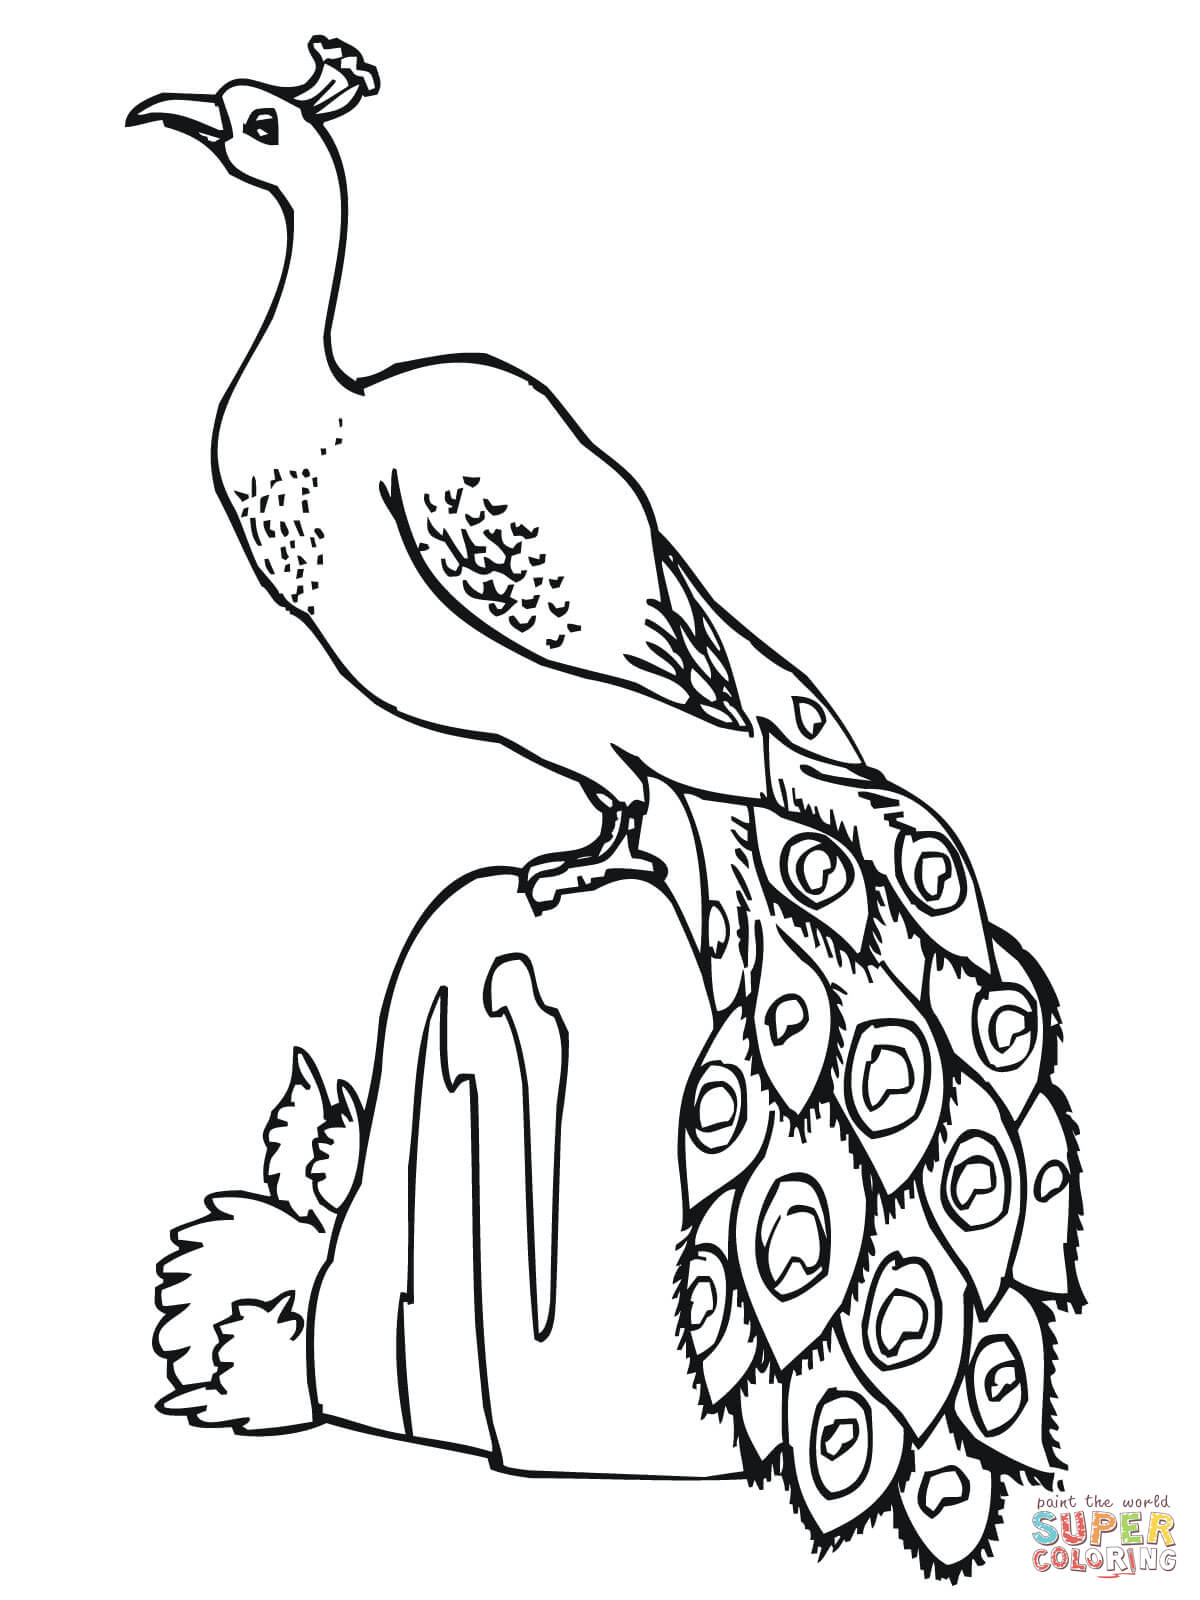 Peacocks coloring pages | Free Coloring Pages